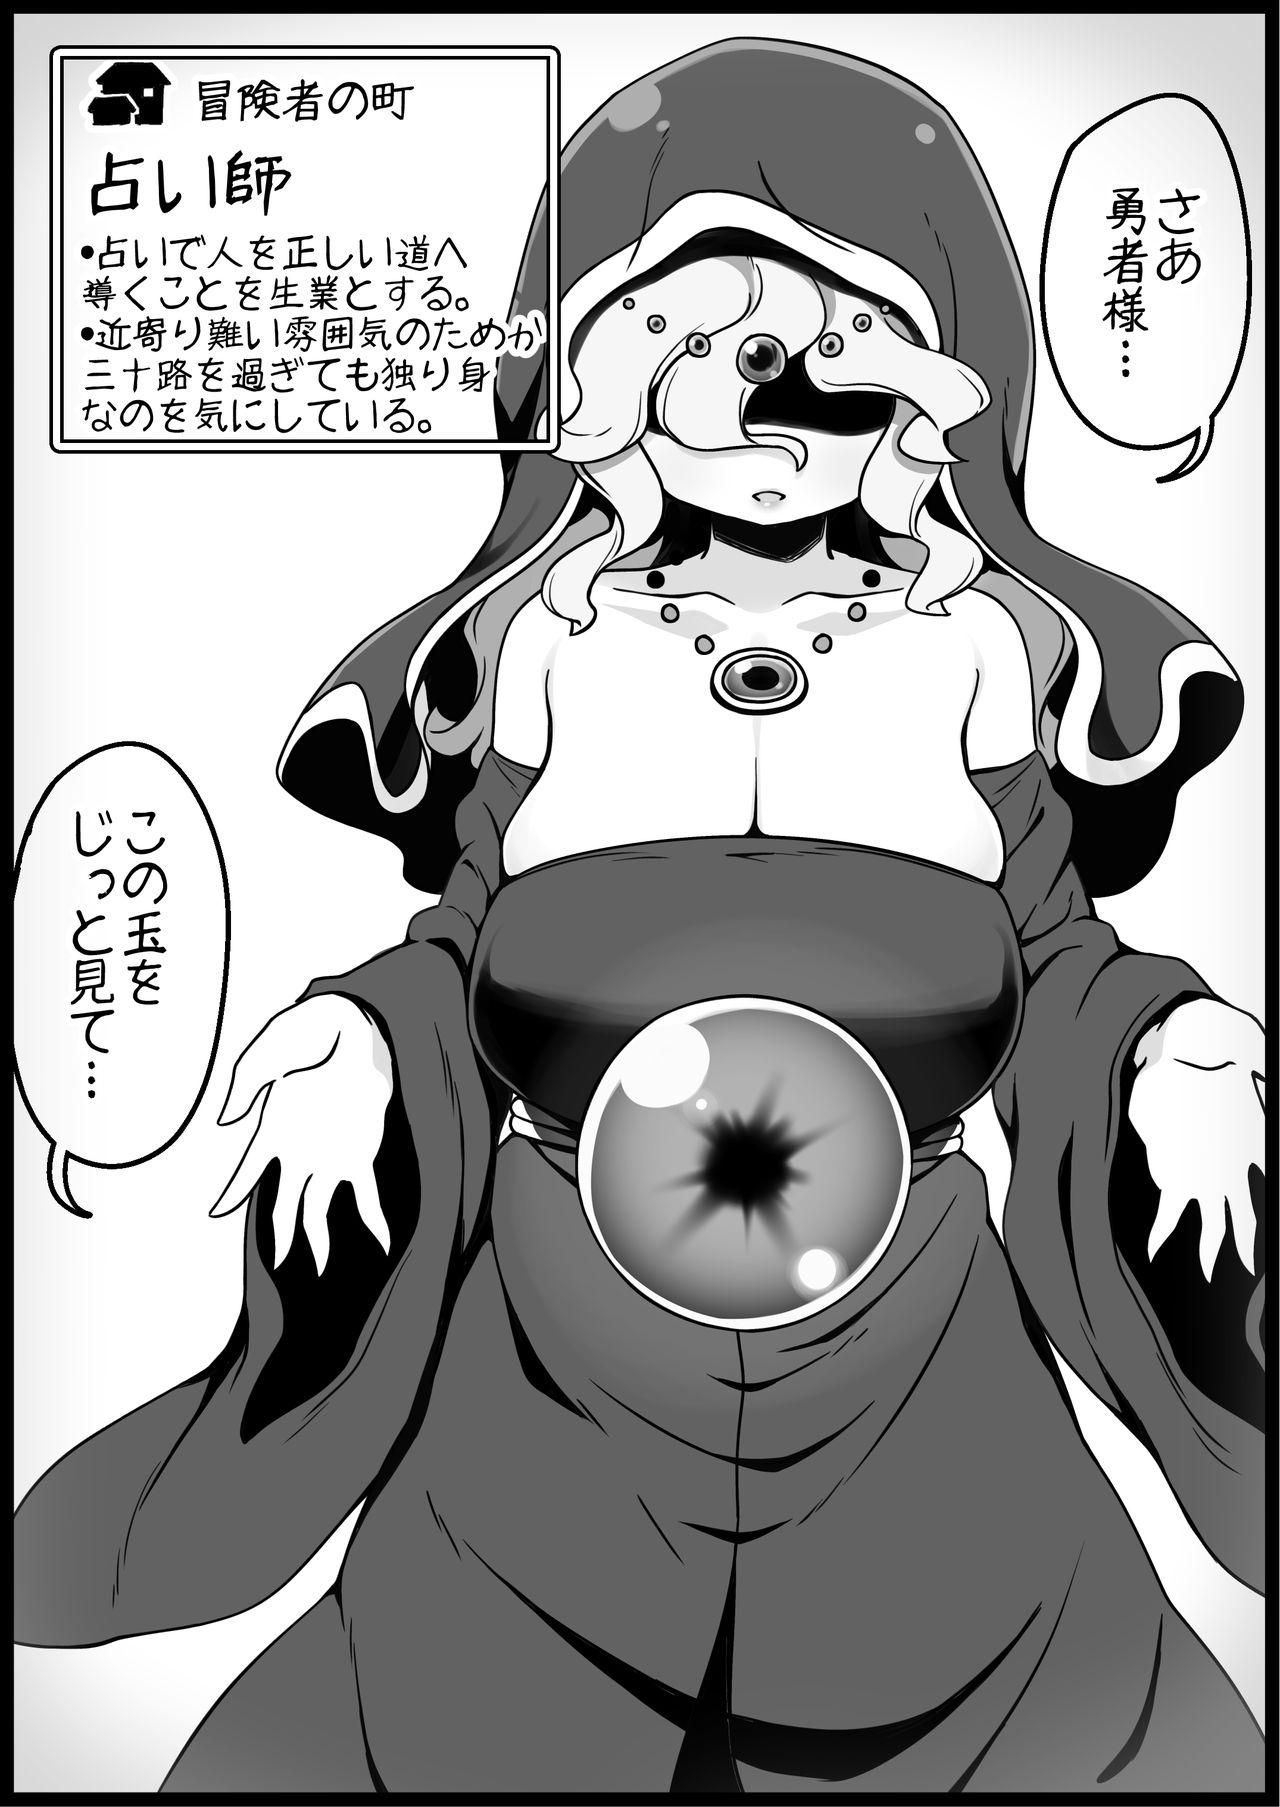 Compilation [Succubus Egg] Fantasy World 2 Too Forgiving to Heroes-Continued NPC (mob) Opponent-Centered Short H Manga Collection- - Original Double Penetration - Page 6